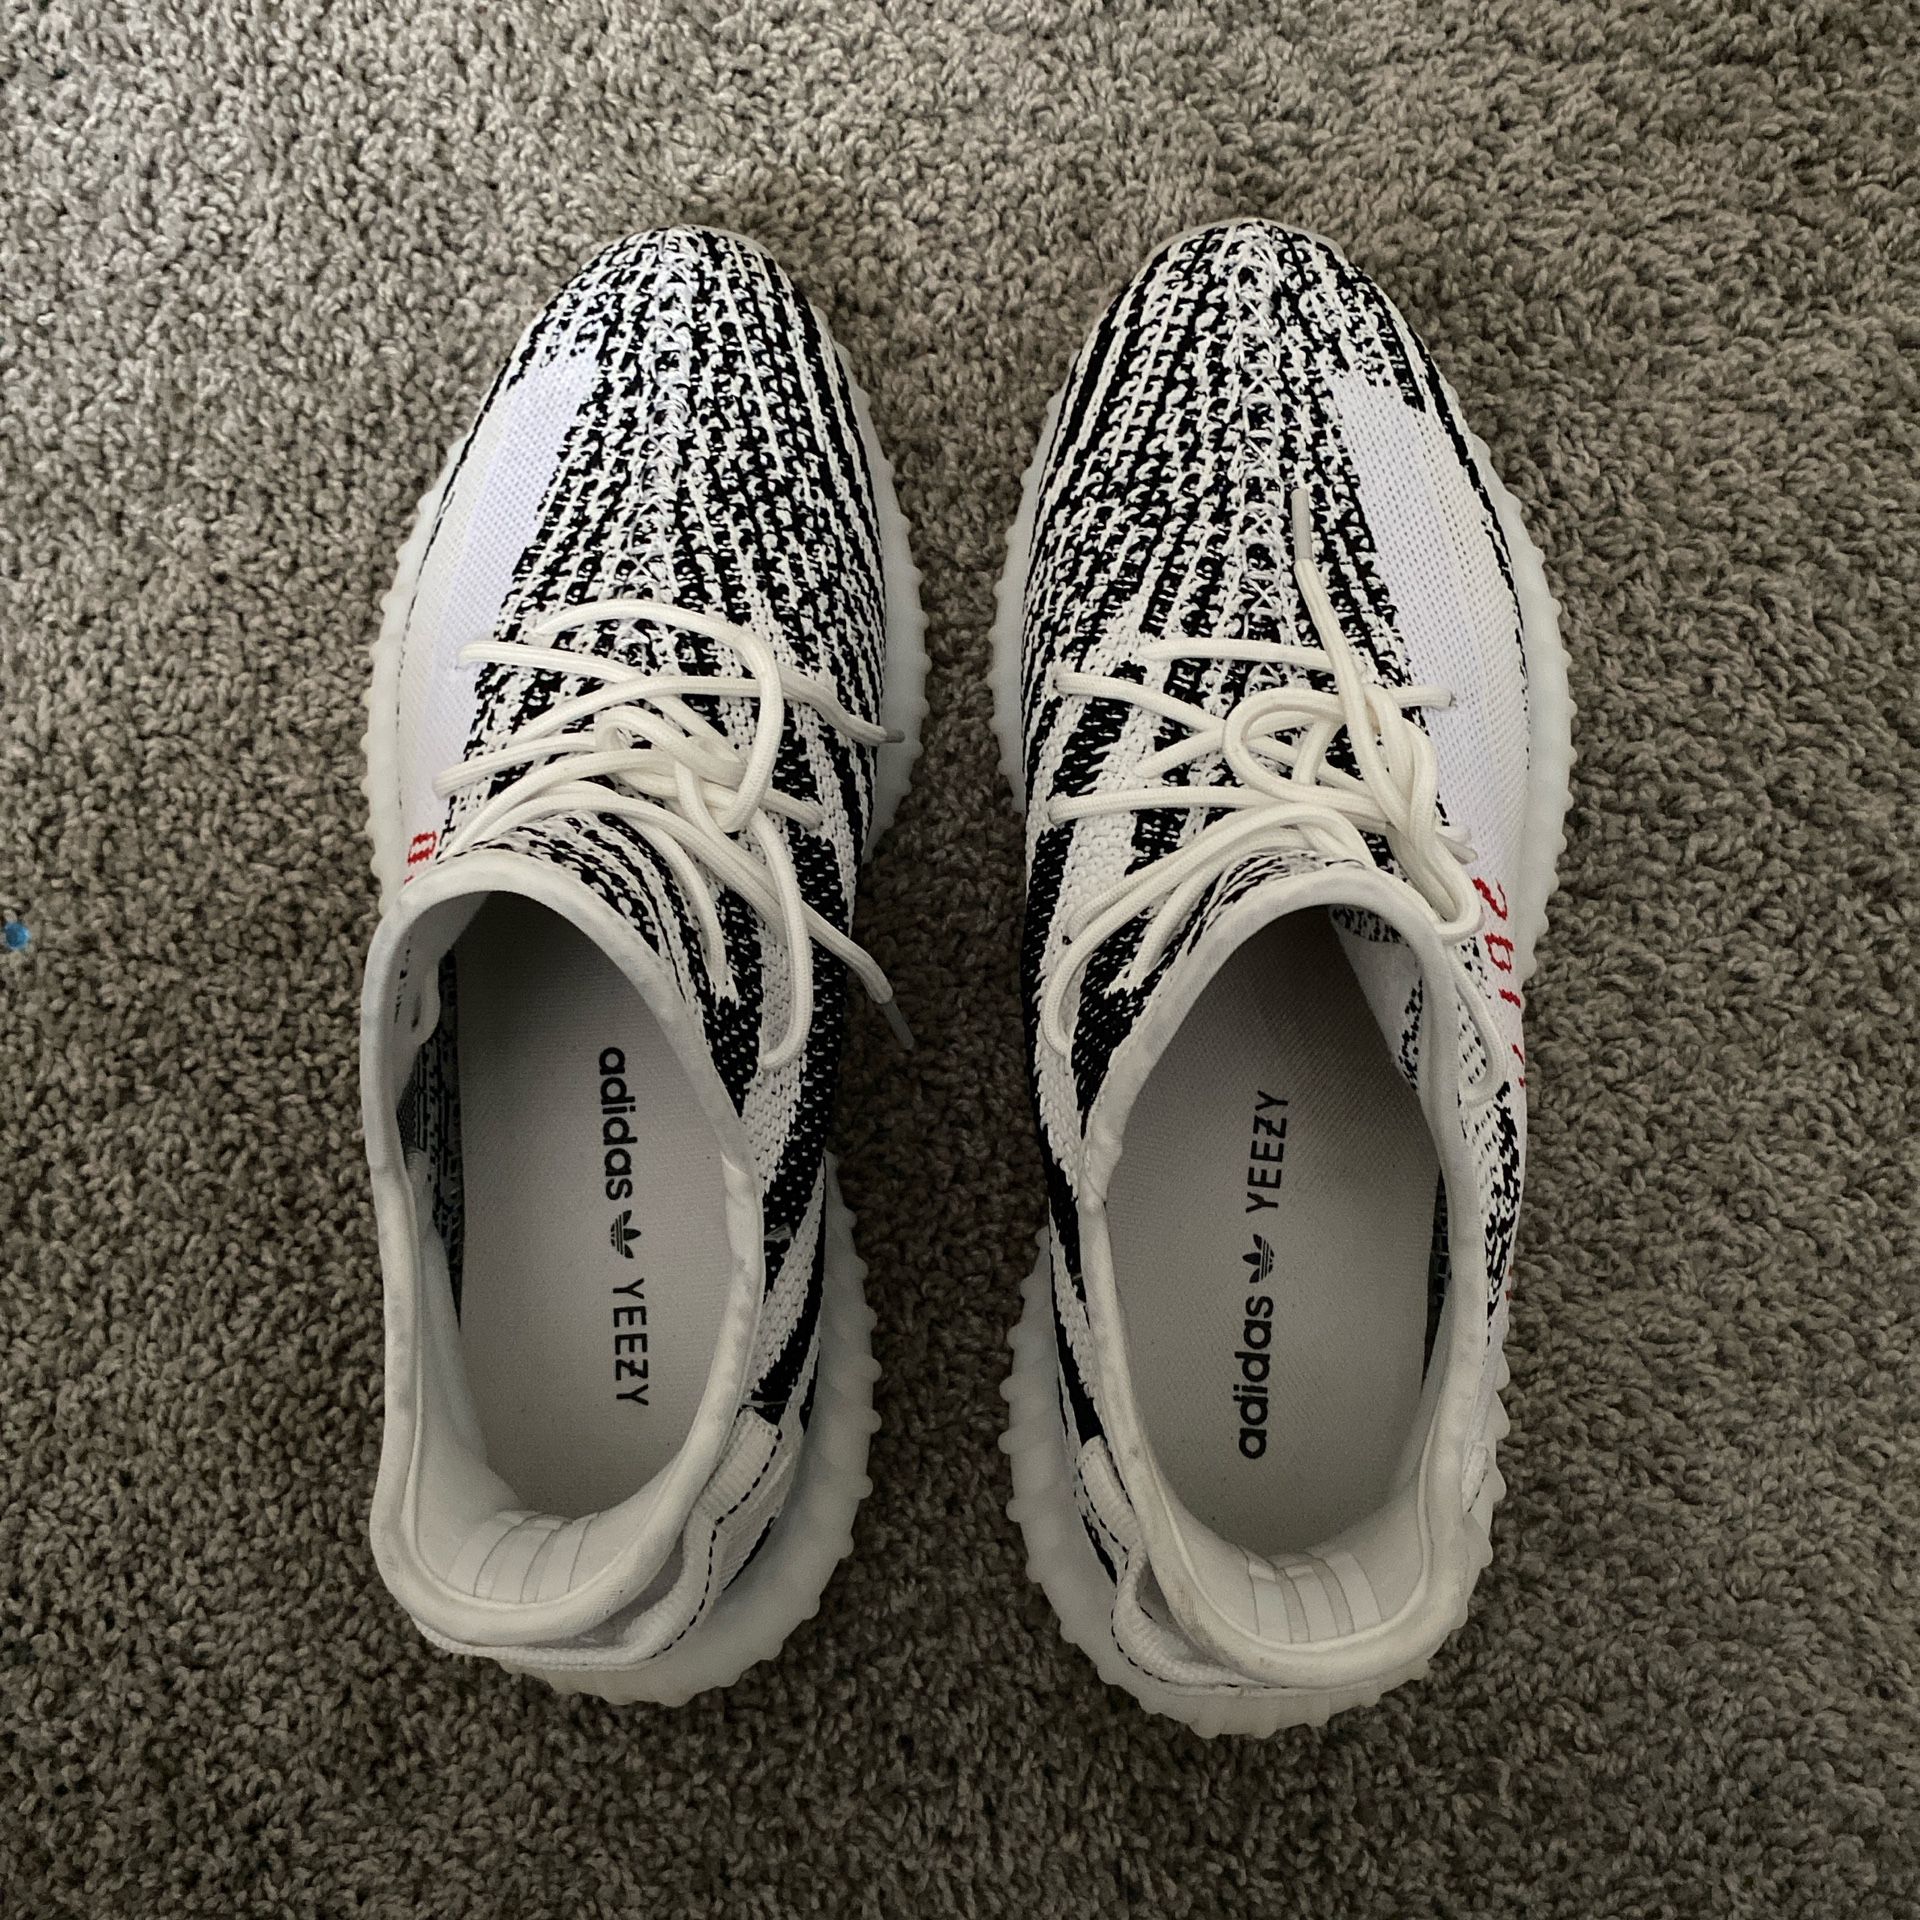 Size 11.5 - adidas Yeezy 350 V2 Zebra Boost White (will clean before shipped)